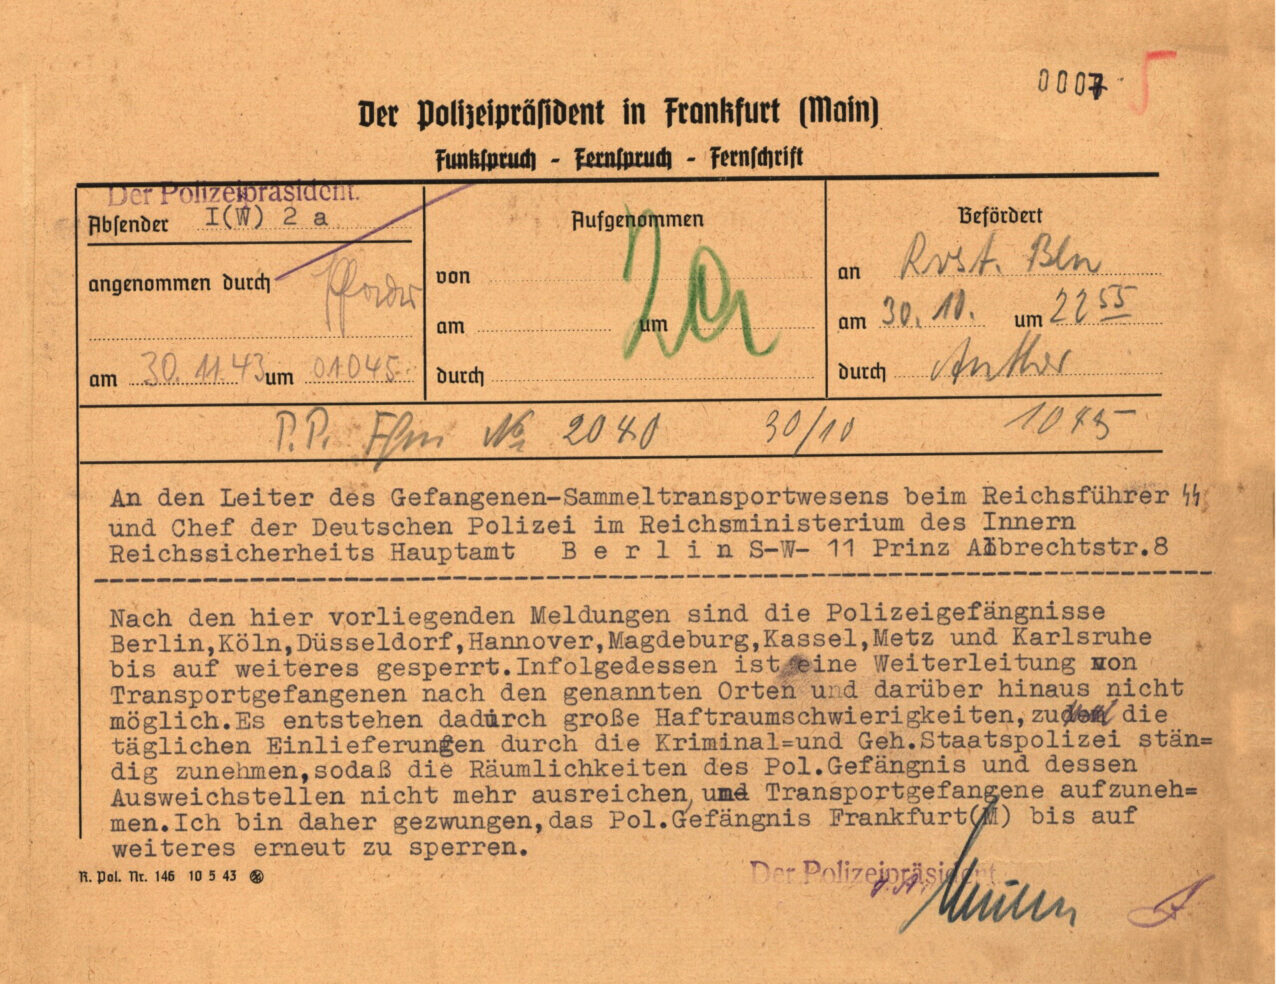 Telex to the Head of Prisoner Transport at the Reichsführer SS and the Chief of the German Police dated 30 November 1943 concerning the blocking of several police prisons, including those in Frankfurt am Main.